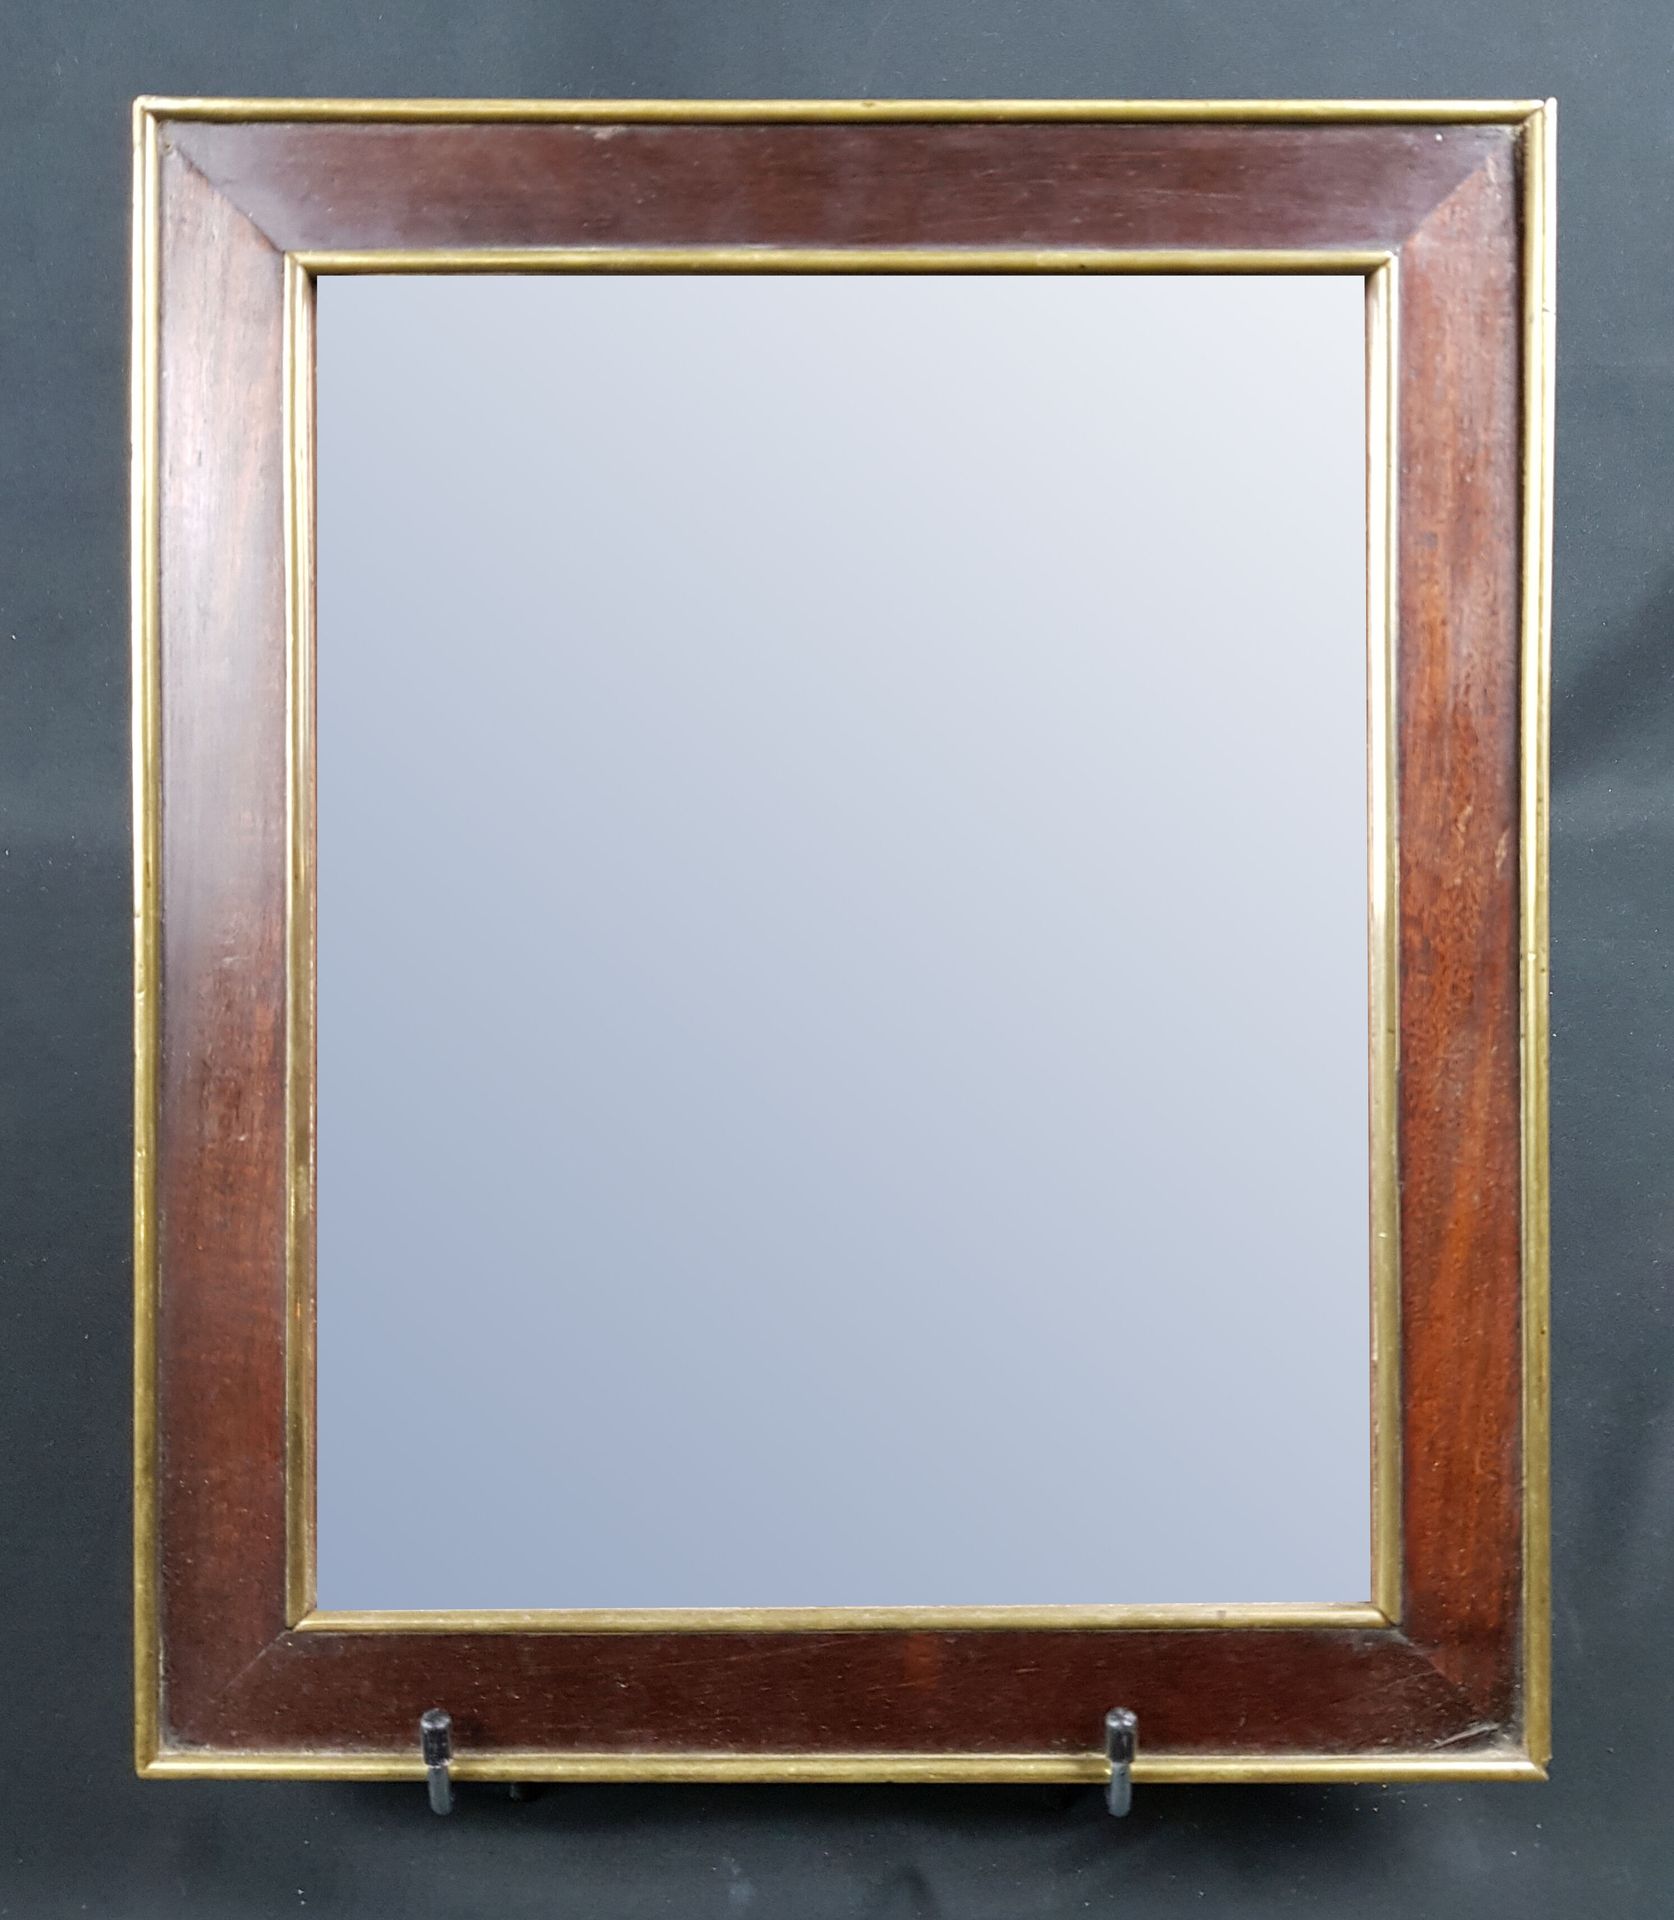 Null Mahogany and brass mirror. H 27 x W 32 cm - wear and tear